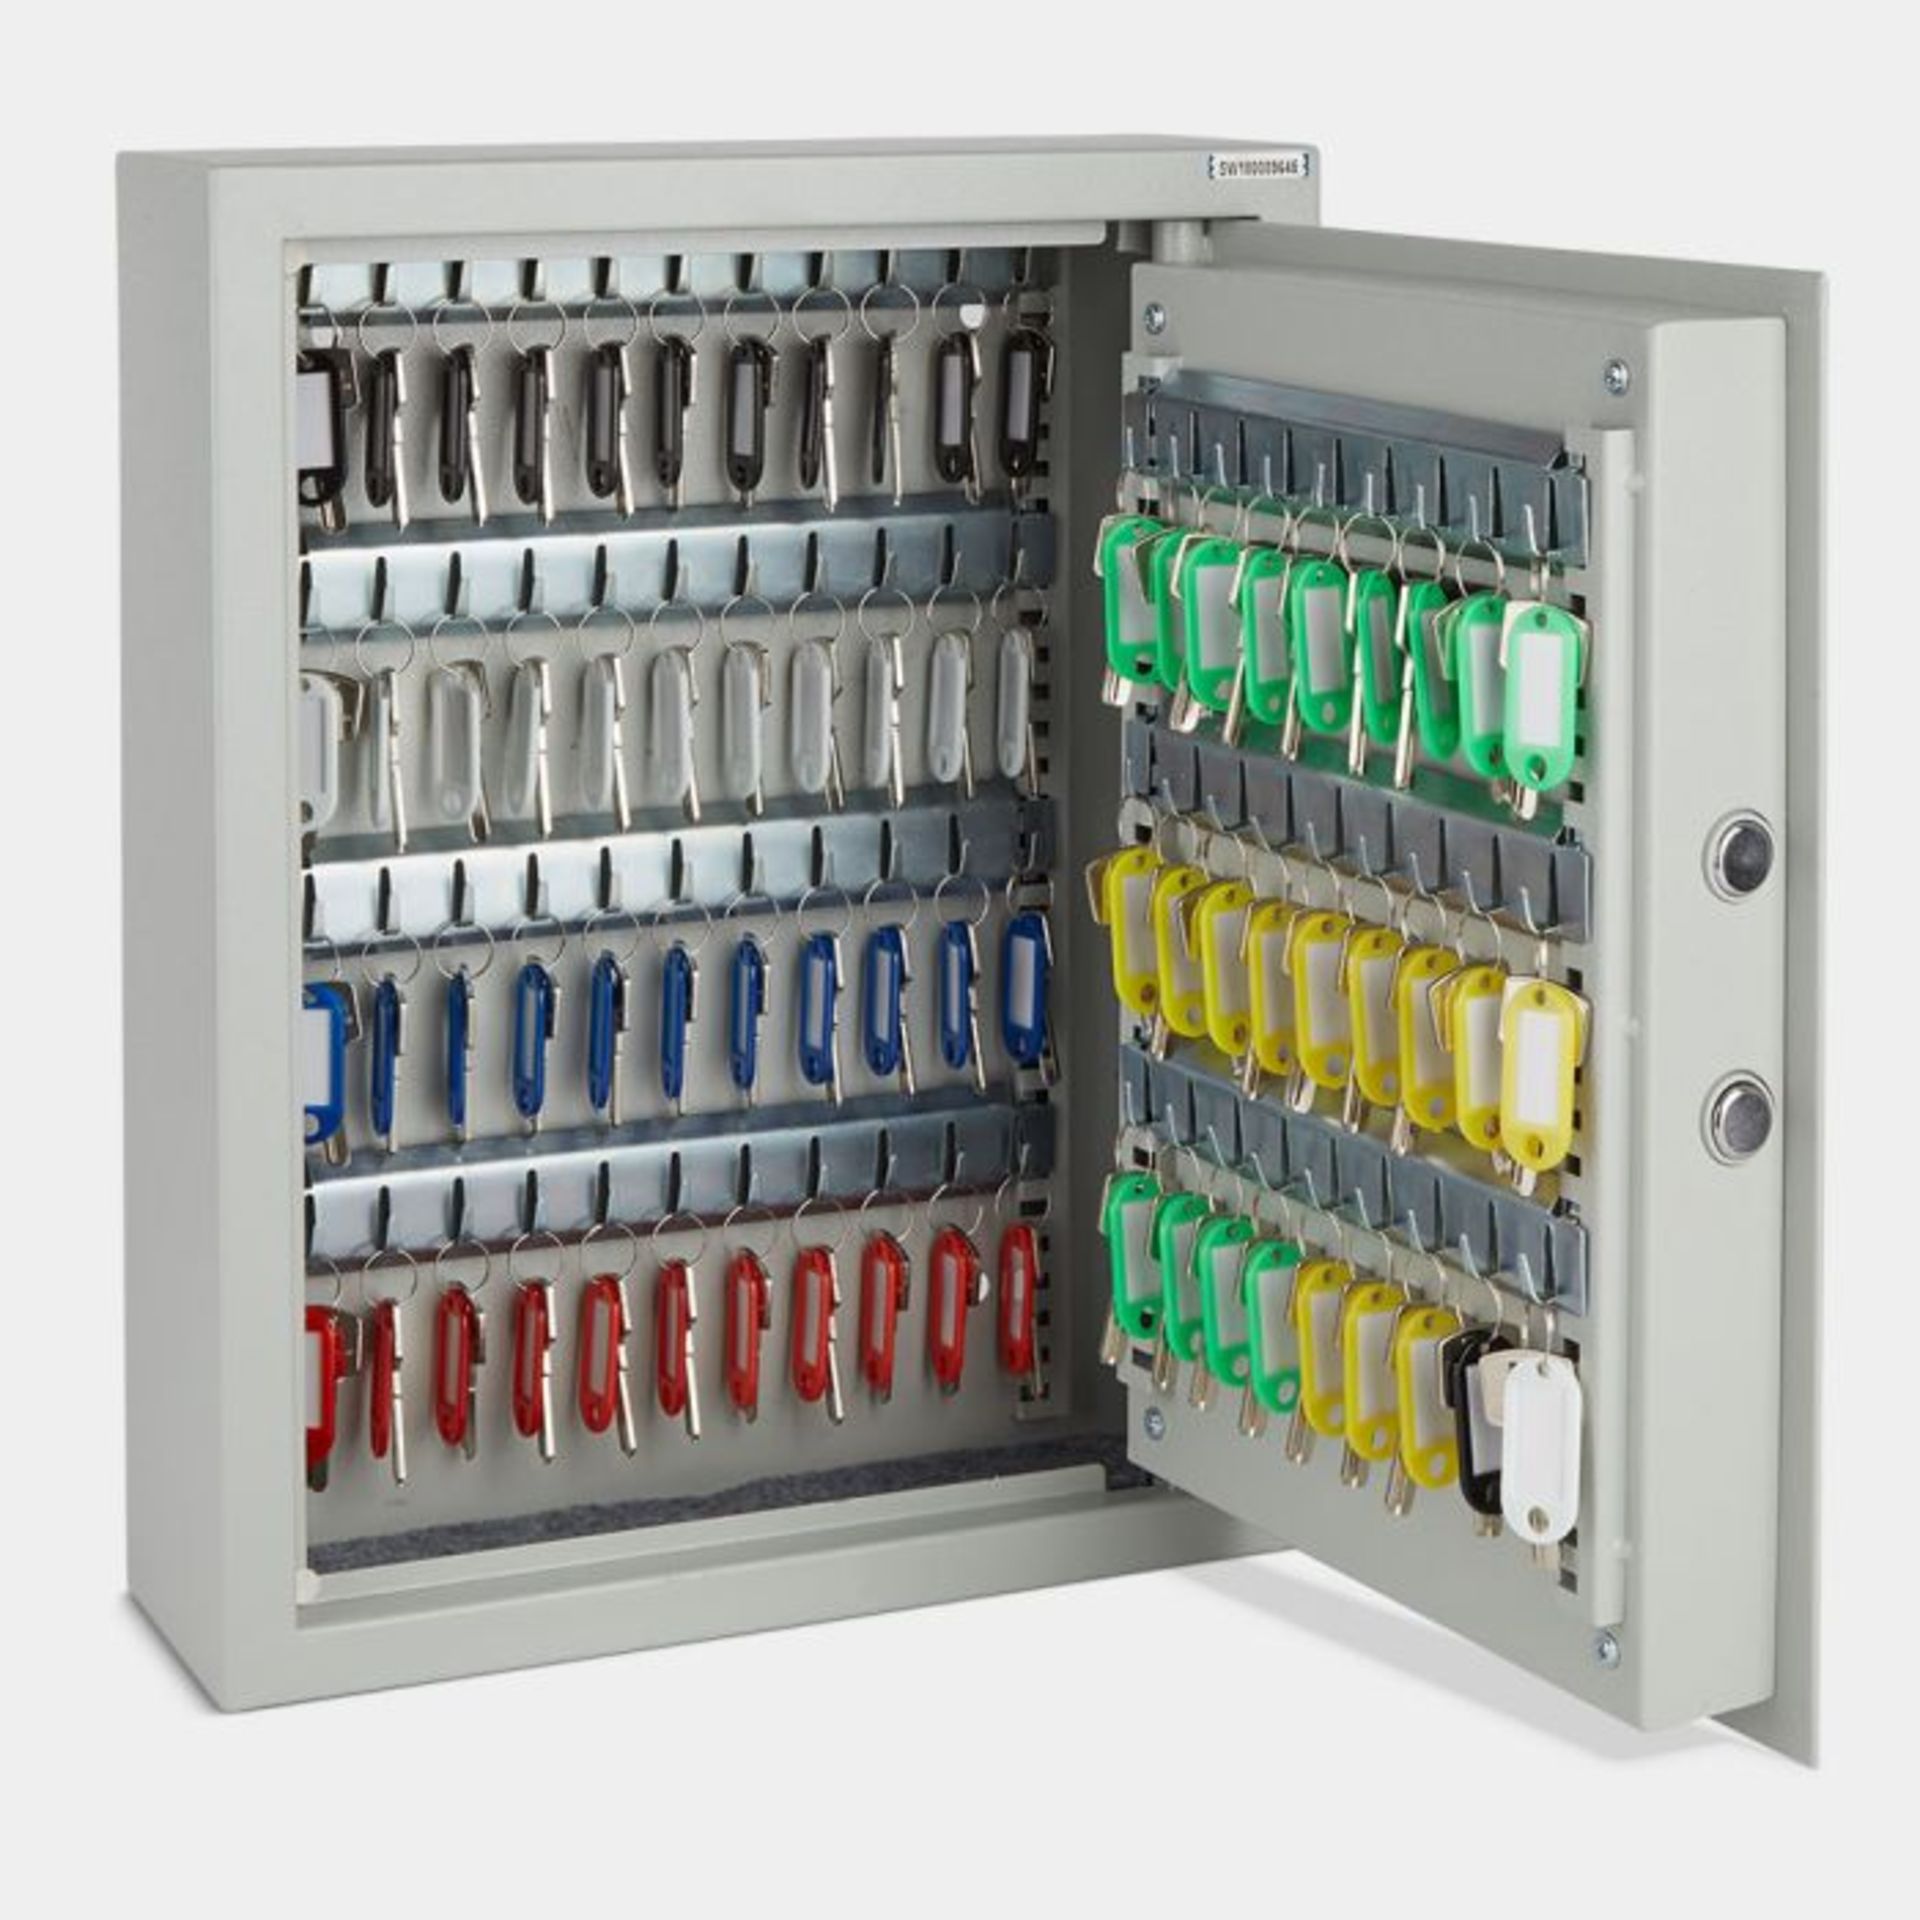 71 Key Digital Cabinet Safe. - ER34. It’s packed with features to provide reliable protection from